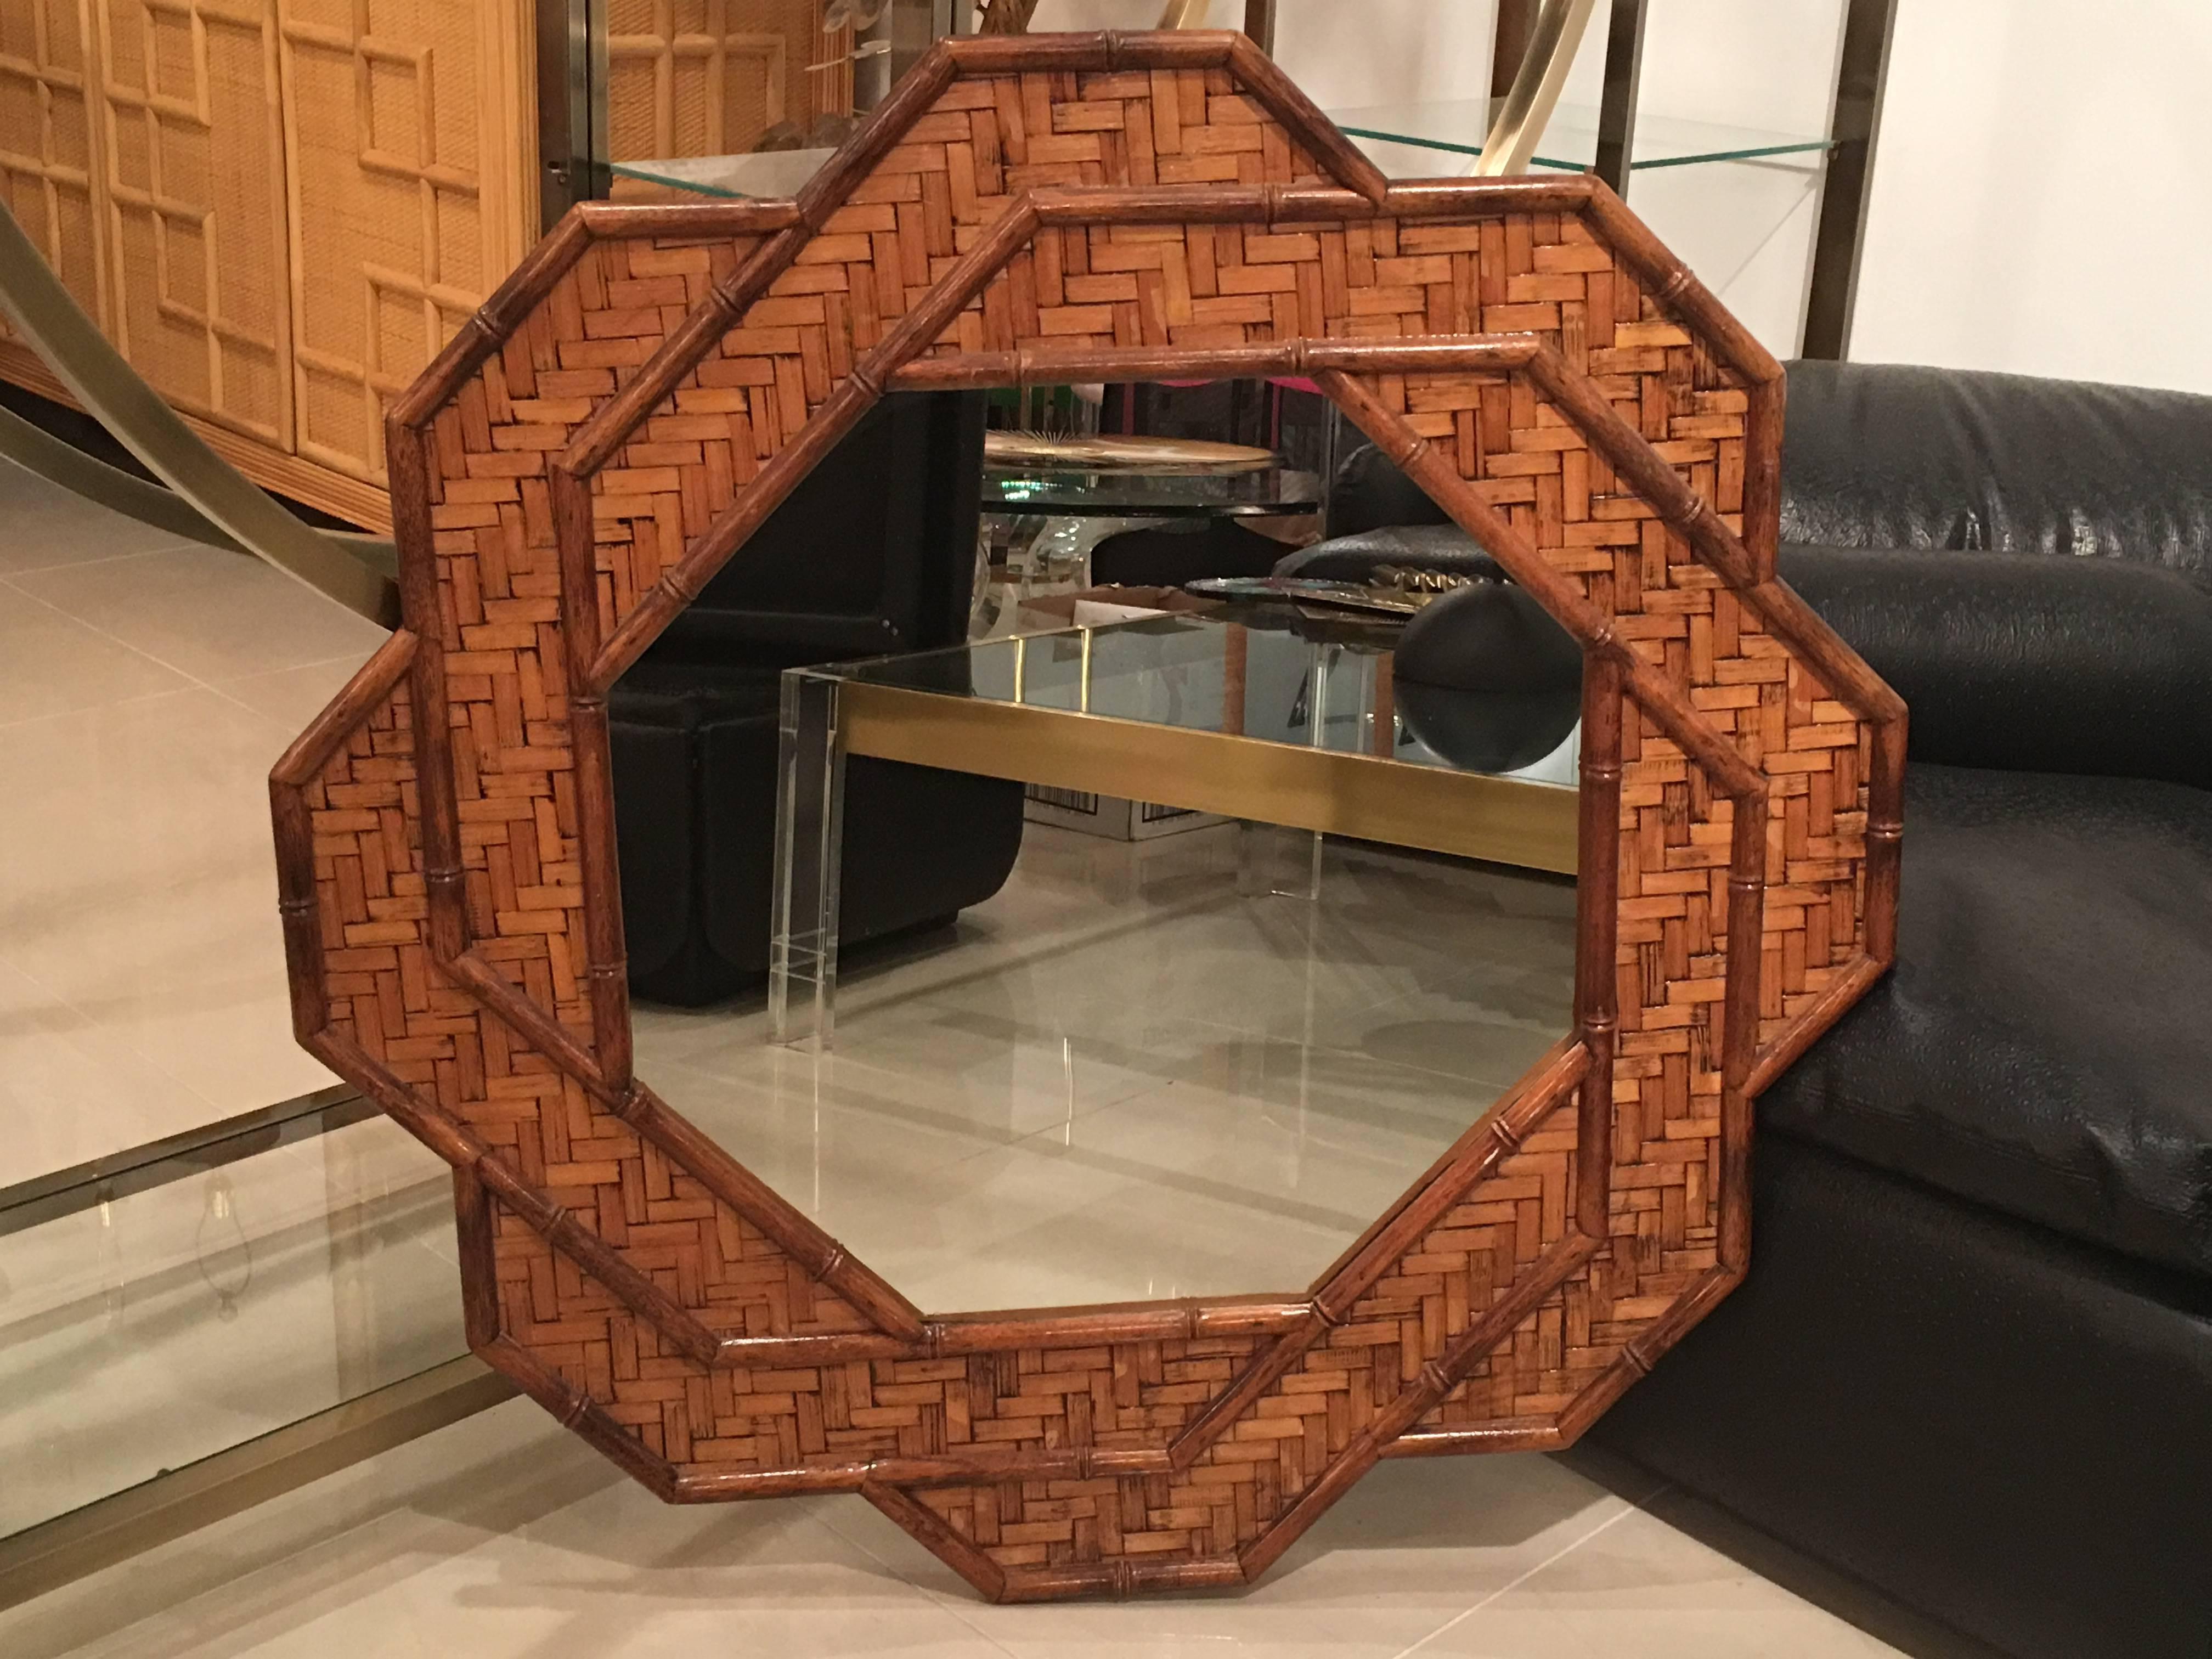 Late 20th Century Rattan Woven Reed Bamboo Wall Mirror Octogonal Tropical Palm Beach Wicker